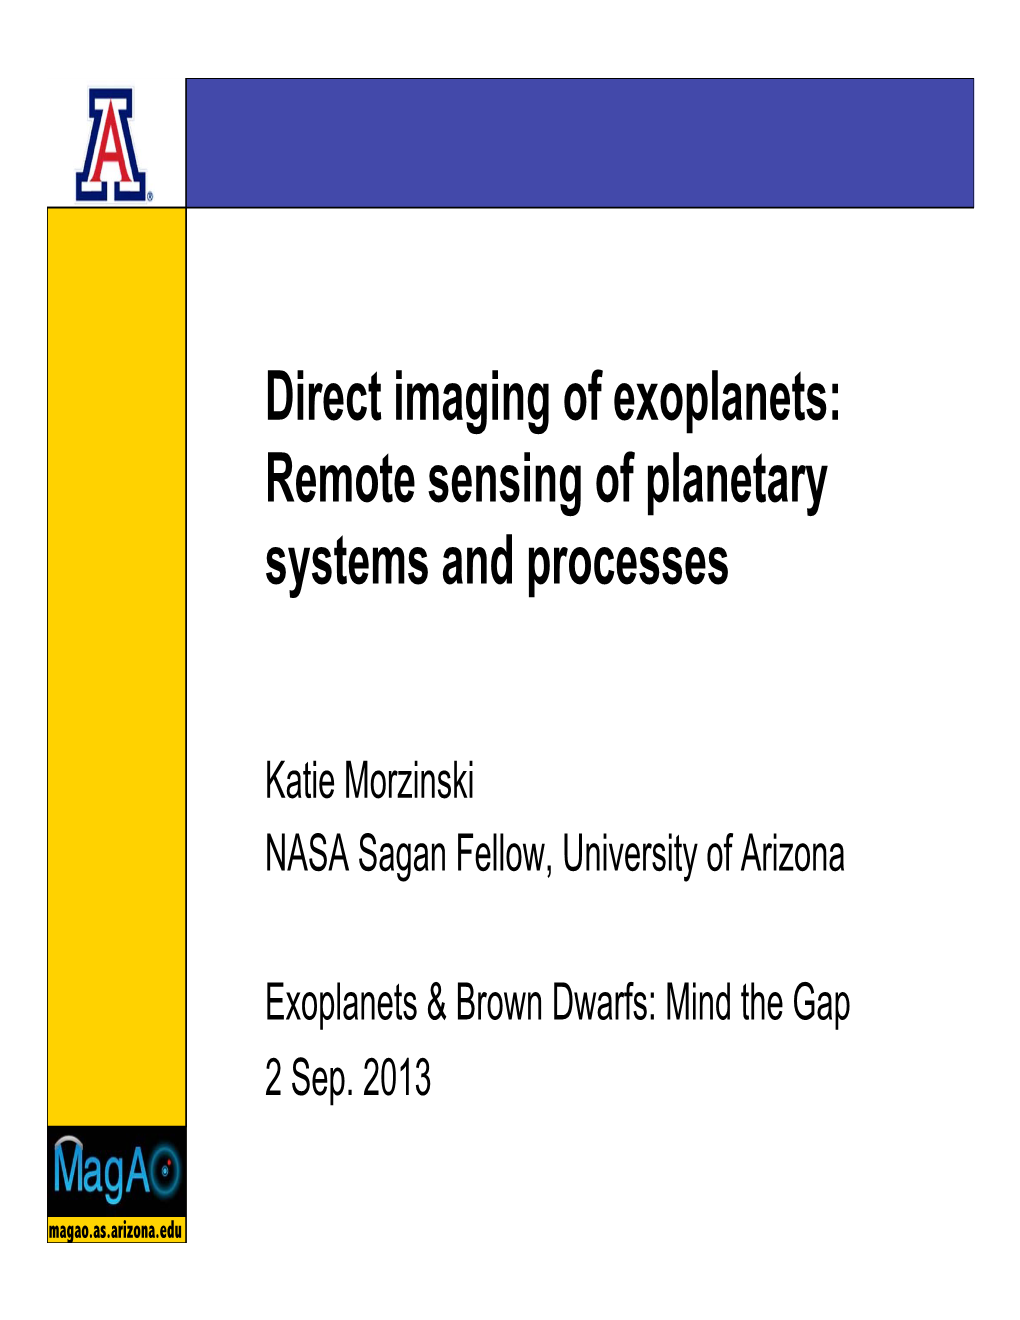 Direct Imaging of Exoplanets: Remote Sensing of Planetary Systems And